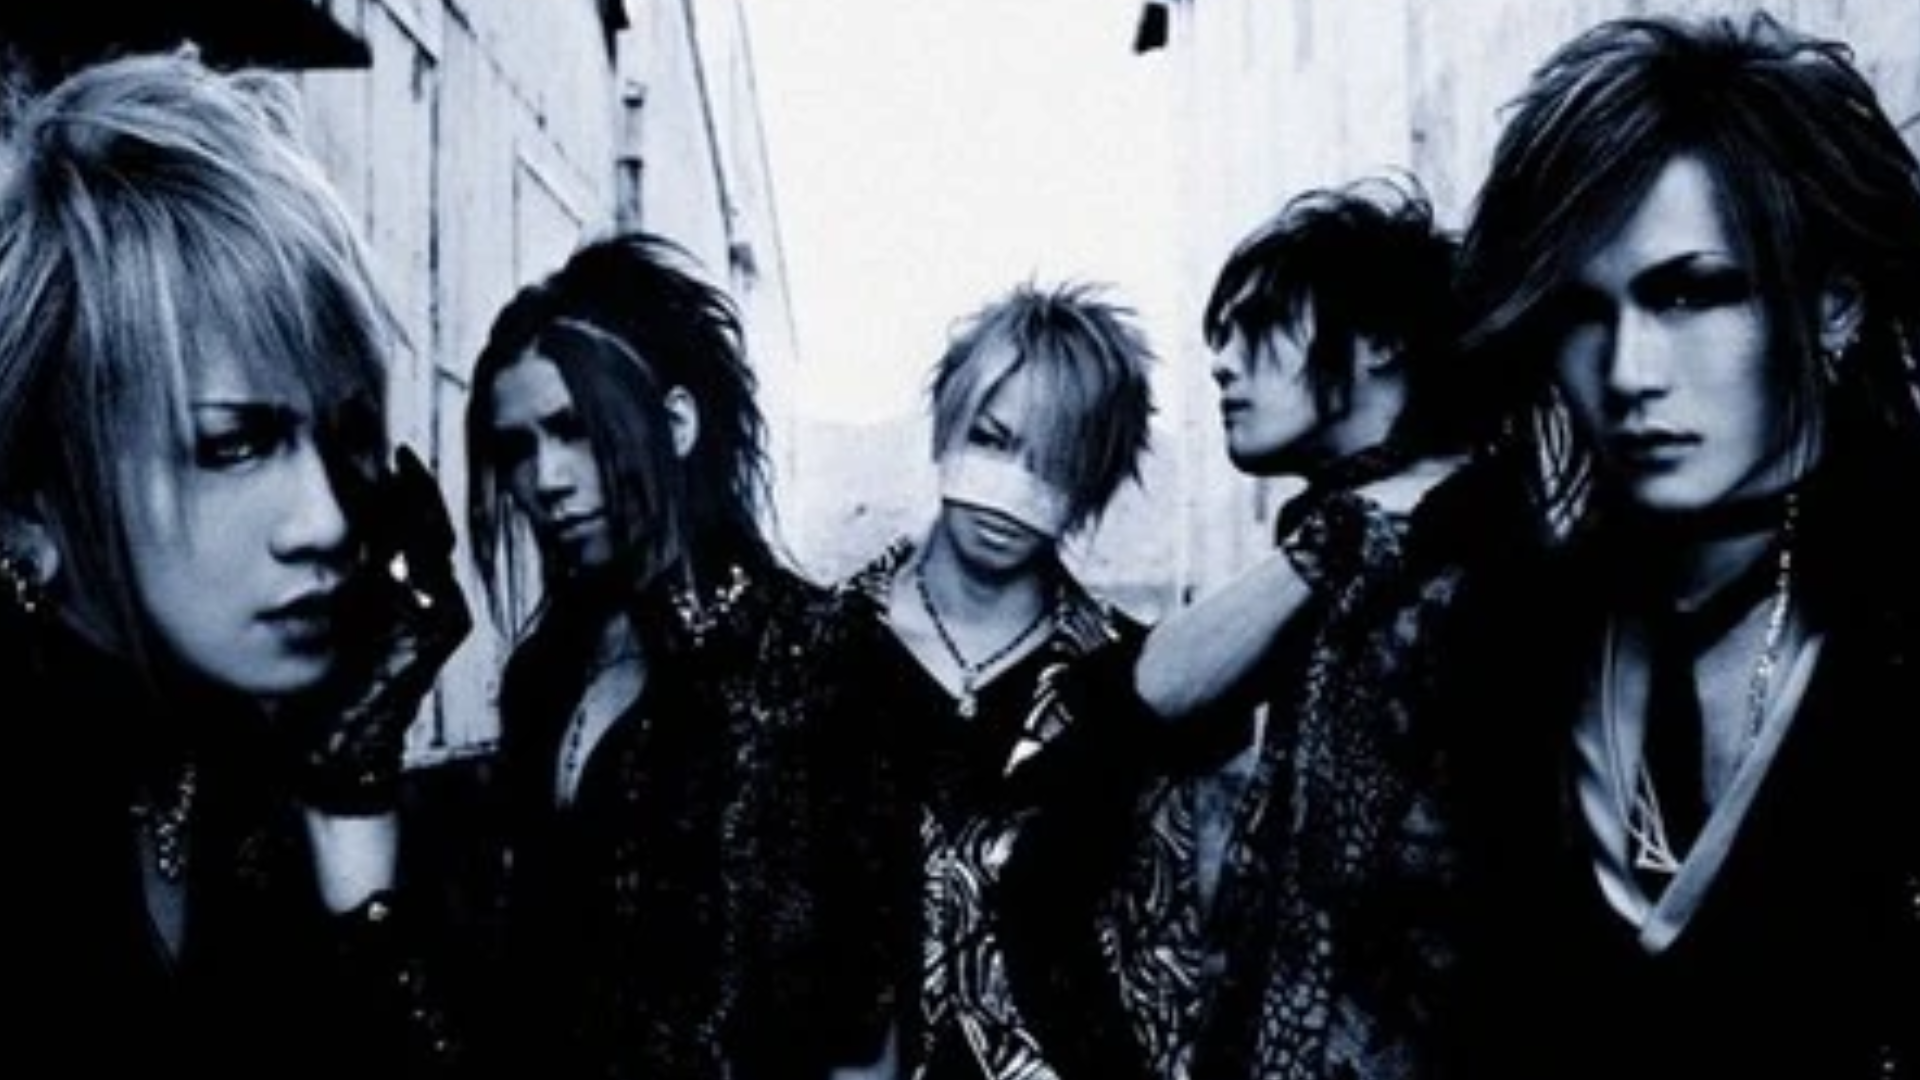 Becoming ‘The Gazette’